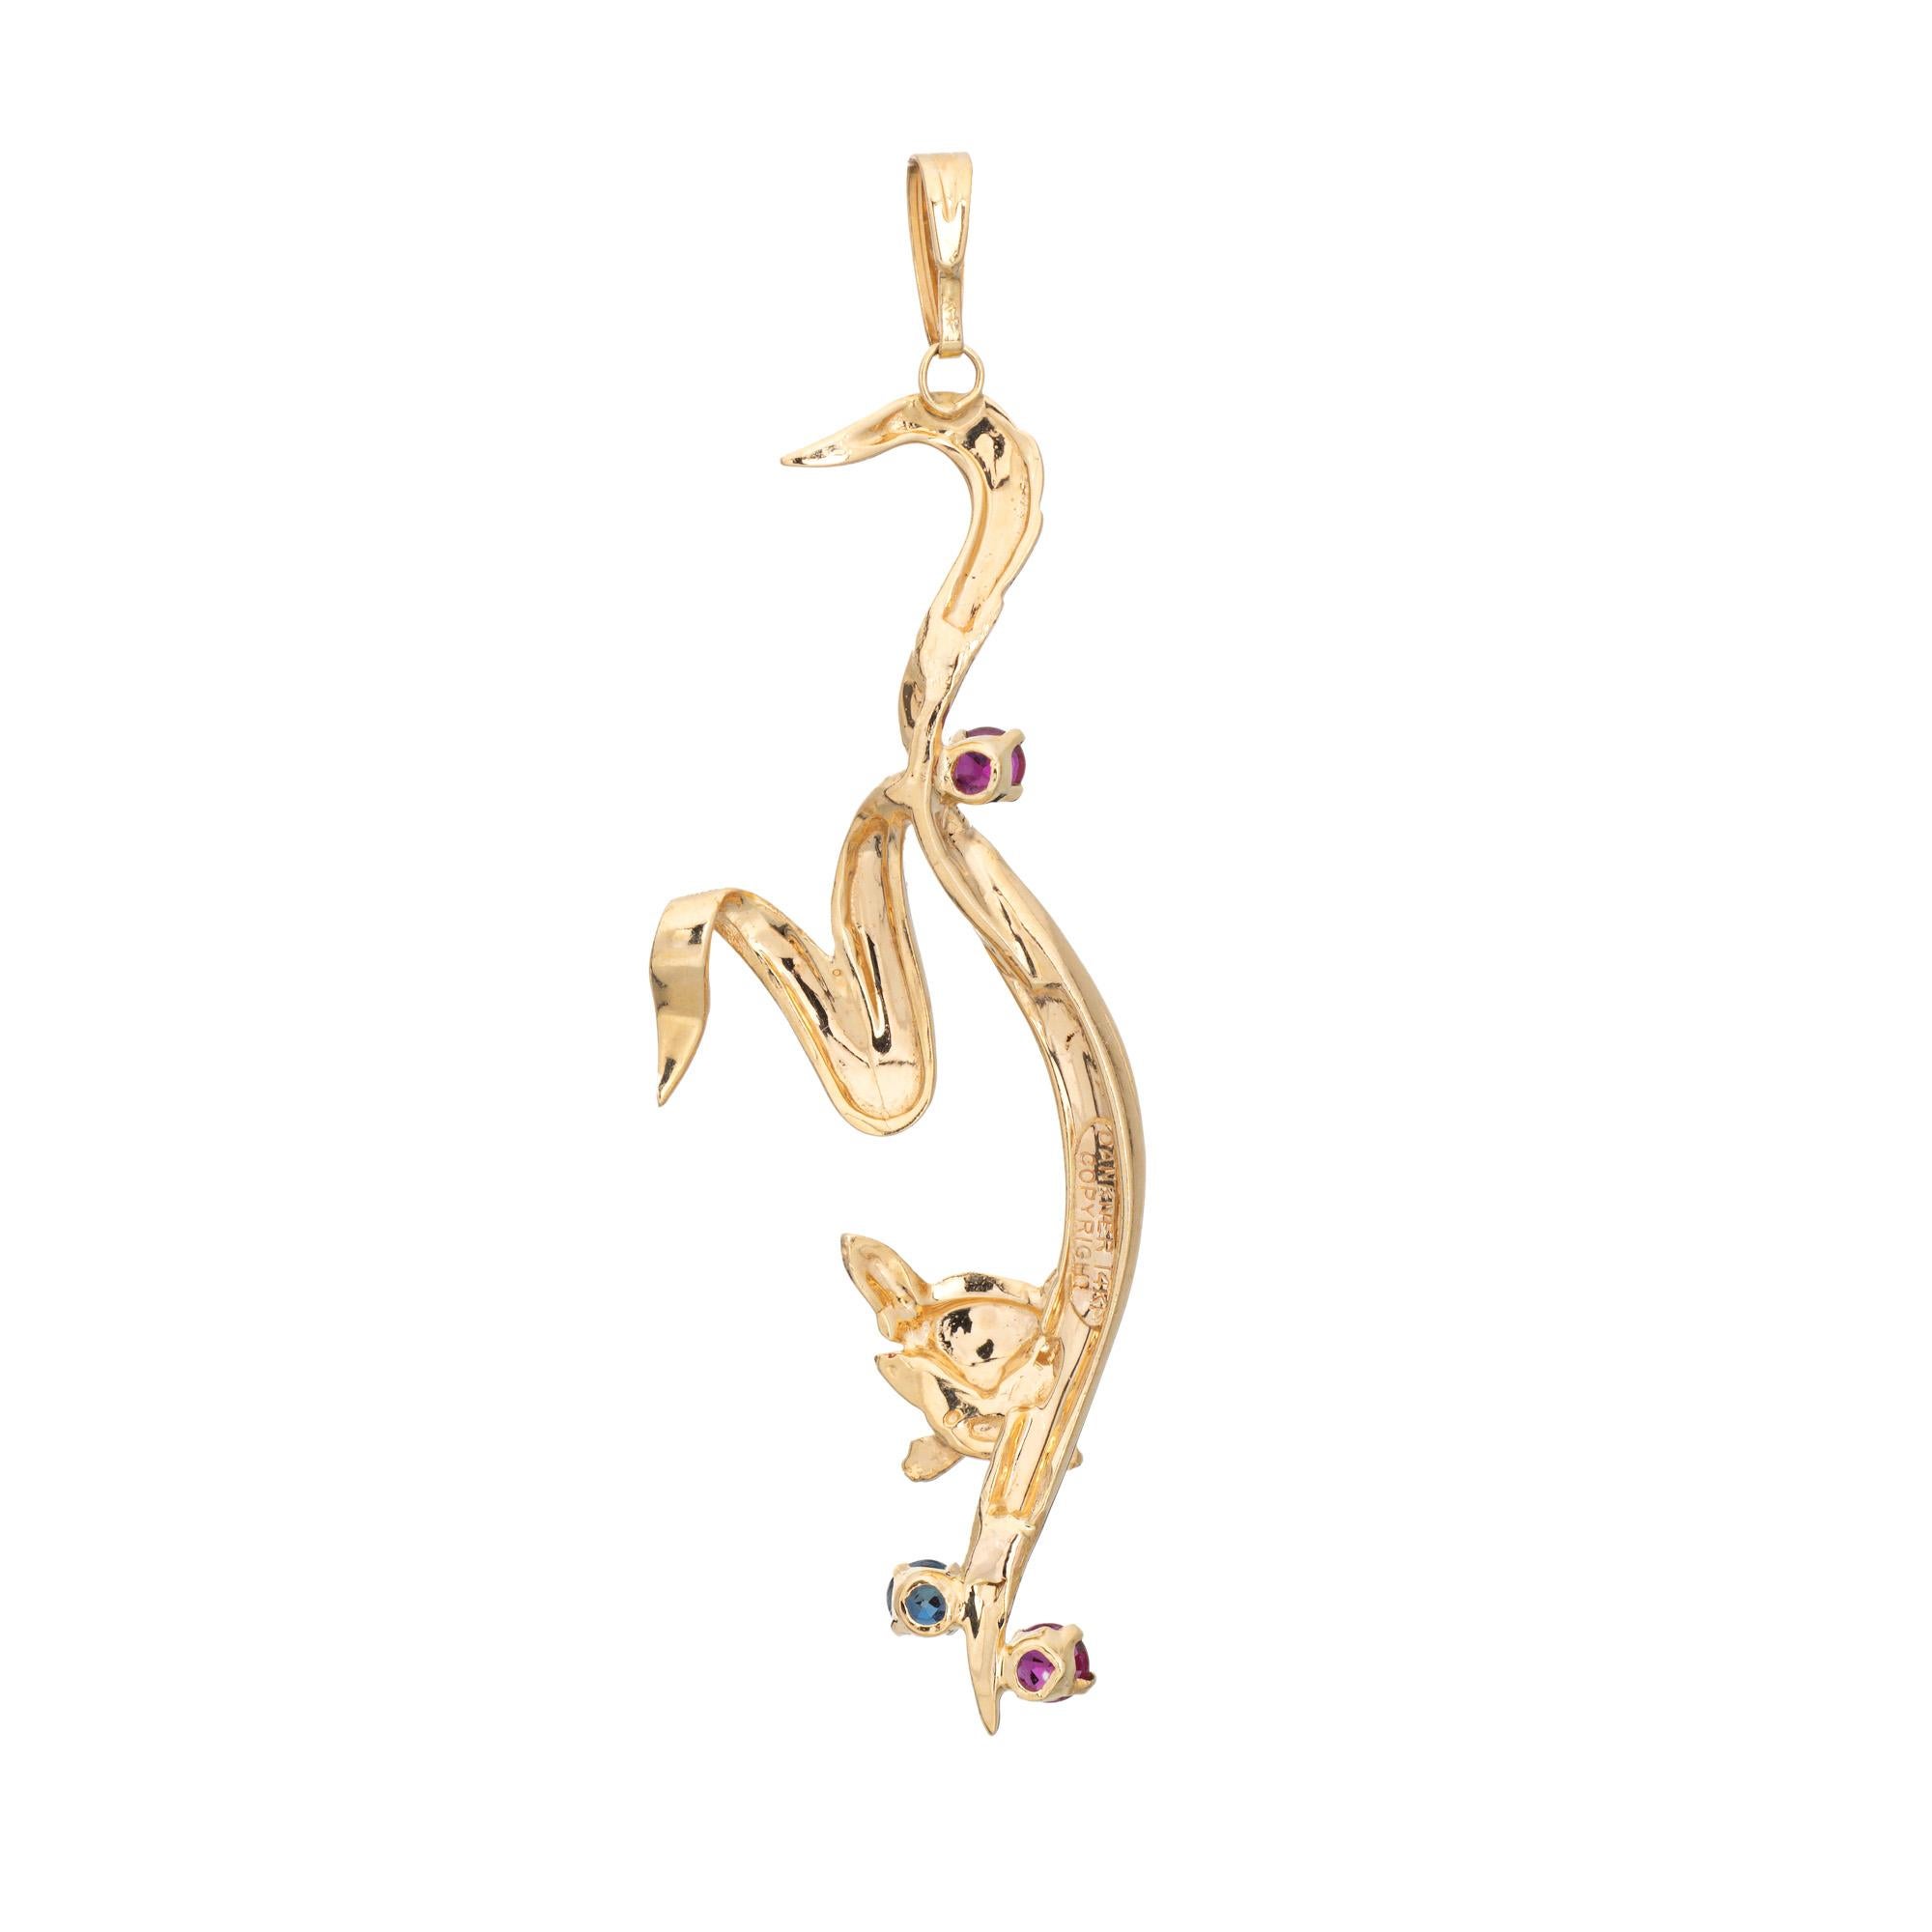 Finely detailed vintage Dankner cat pendant crafted in 14k yellow gold (circa 1960s to 1970s).  

Two rubies measure approx. 3mm each, one sapphire measures approx. 3mm. The gemstones are in very good condition and free of cracks or chips.  

The